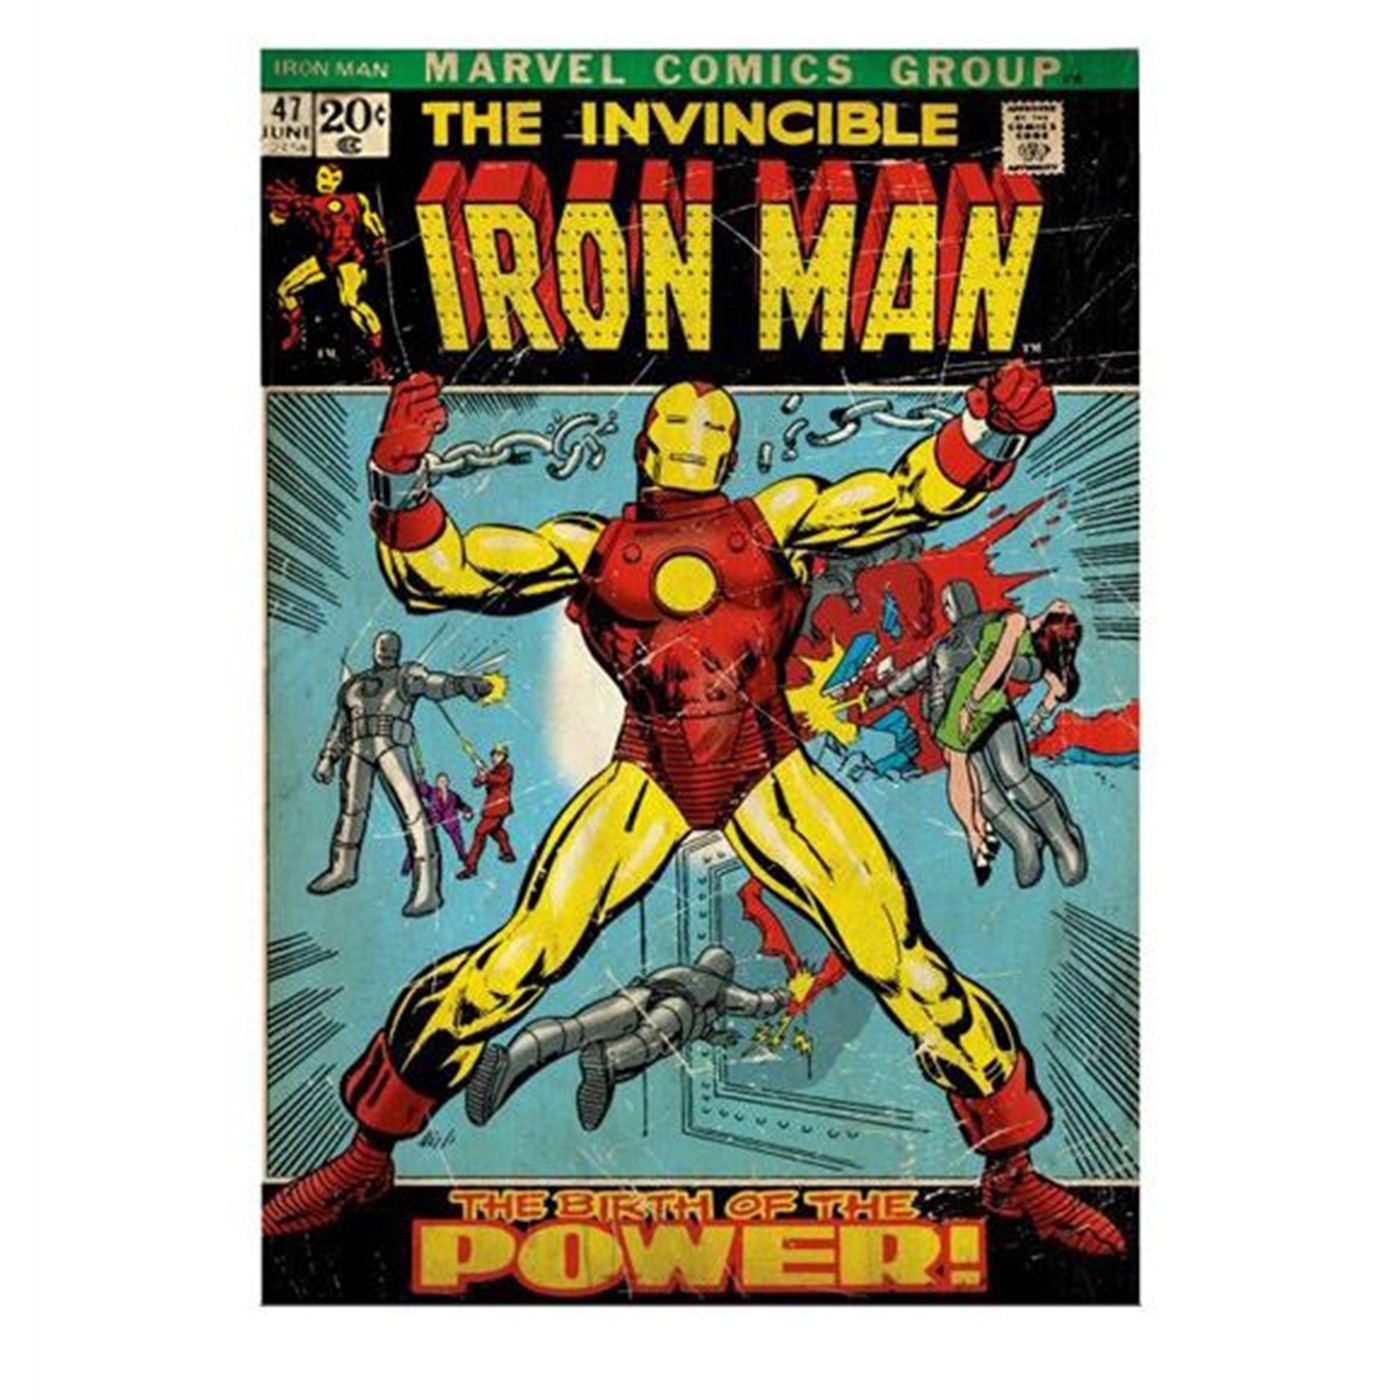 Iron Man Issue 47 Junior Wall Decal